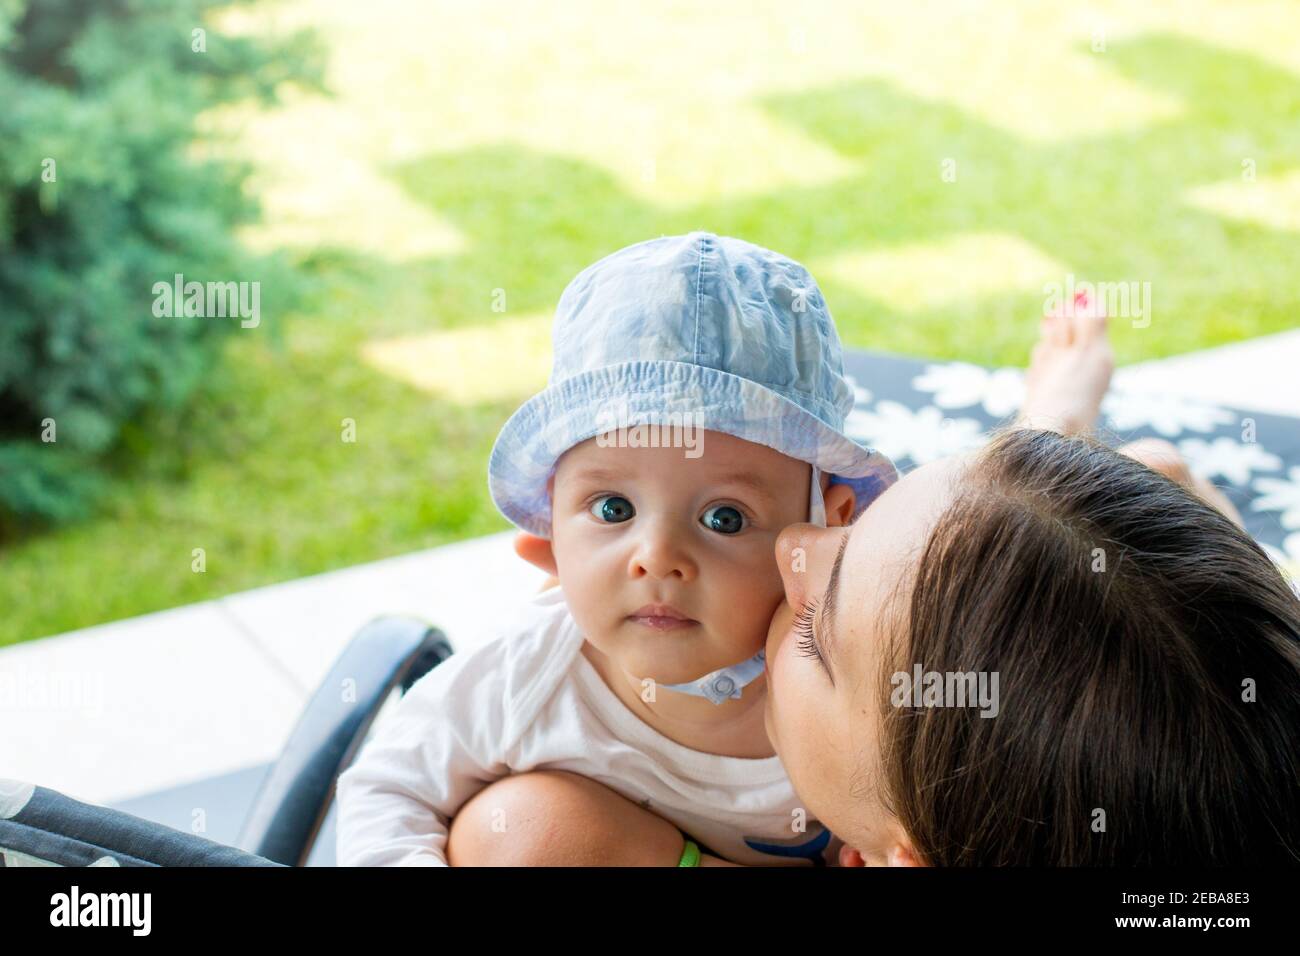 Cheerful mother hugging, cuddling and cheek kissing child outdoor, portrait of lovely blue eyed baby boy resting in mom's loving arms Stock Photo